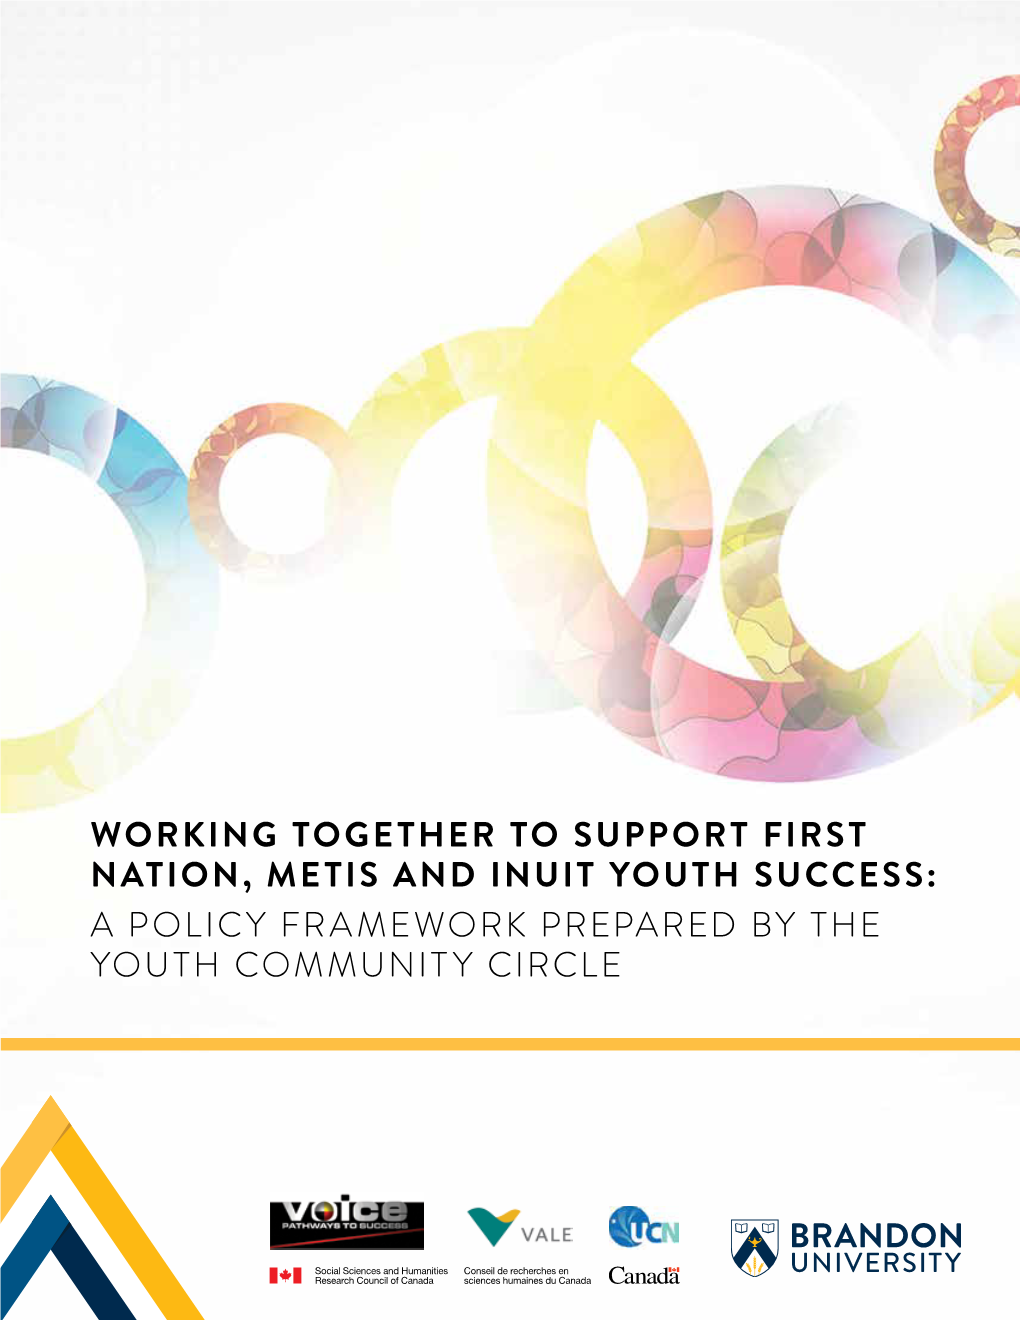 Working Together to Support First Nation, Metis and Inuit Youth Success: a Policy Framework Prepared by the Youth Community Circle